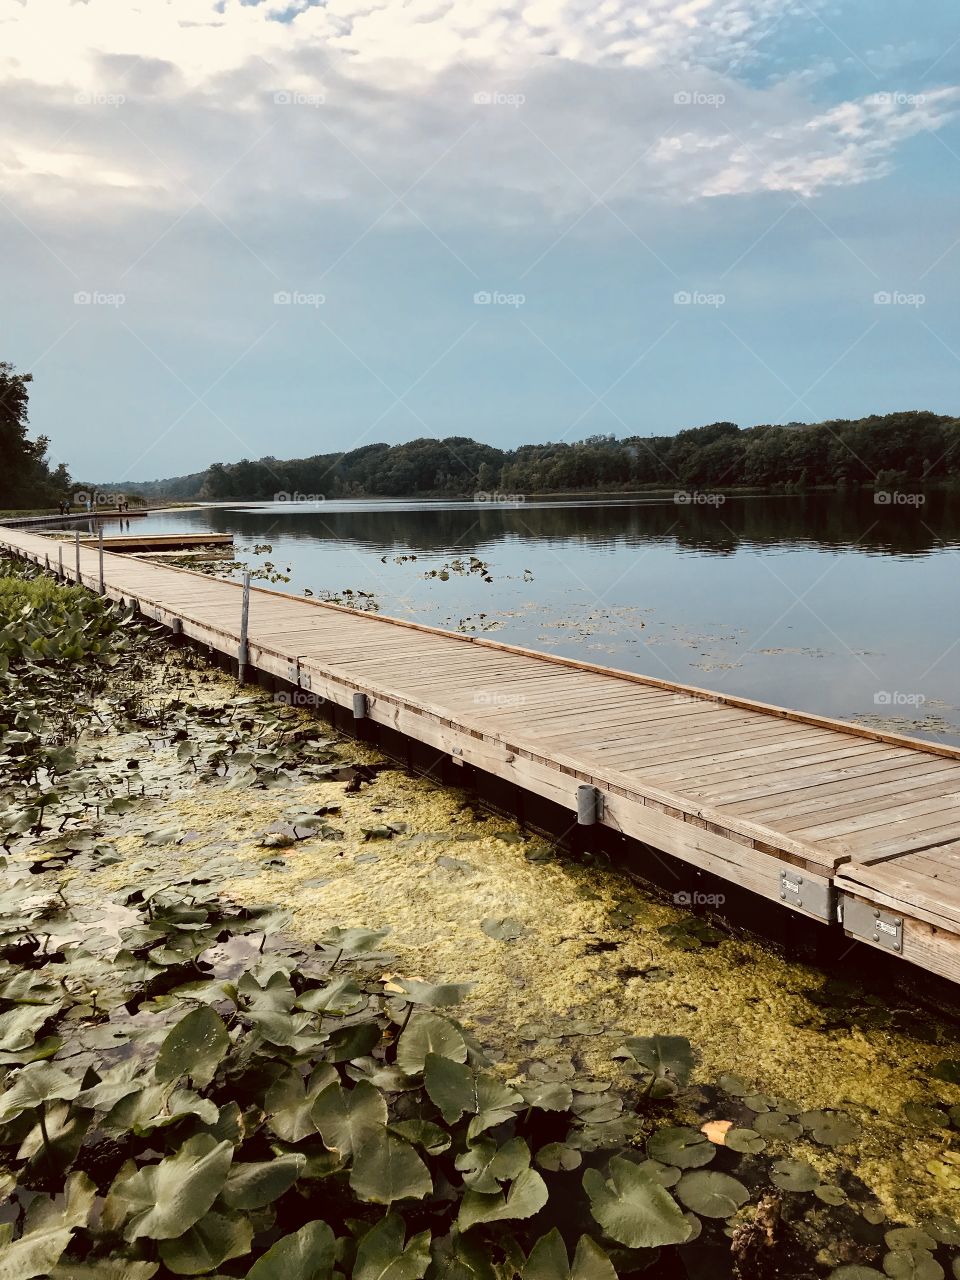 Dock on a small lake 